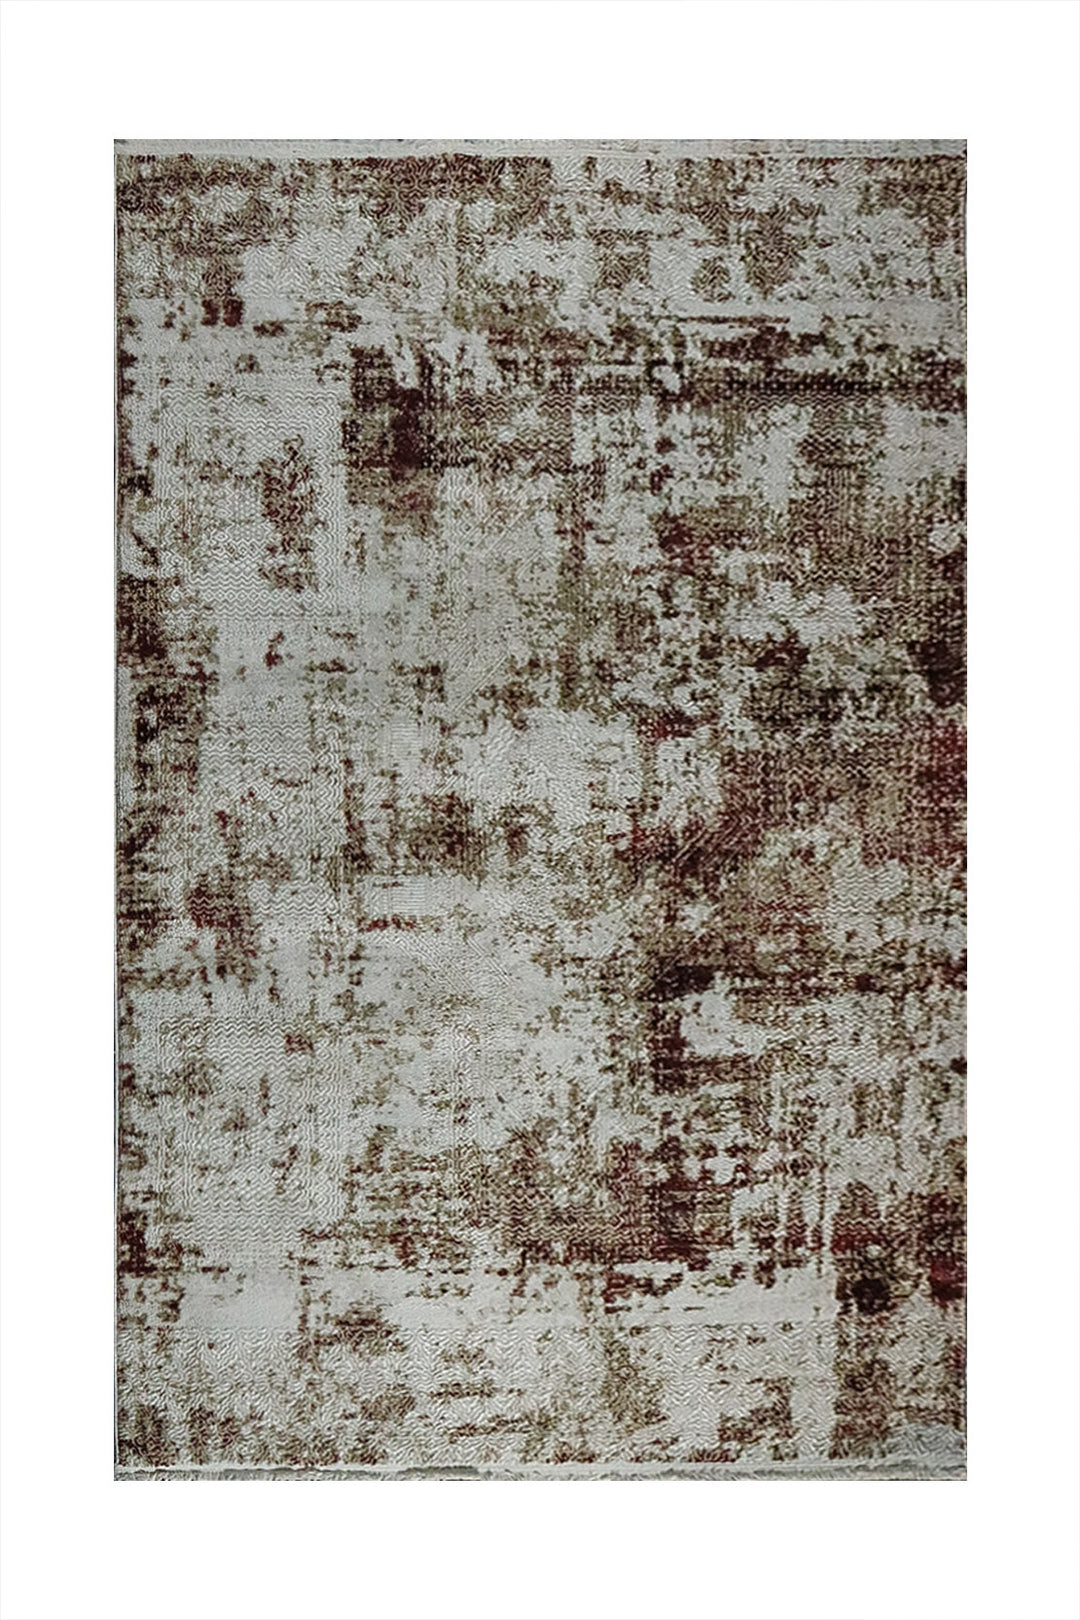 Turkish Modern Festival 1 Rug -  5.24 x 7.54 FT - Gray -  Superior Comfort, Modern Style Accent Rugs